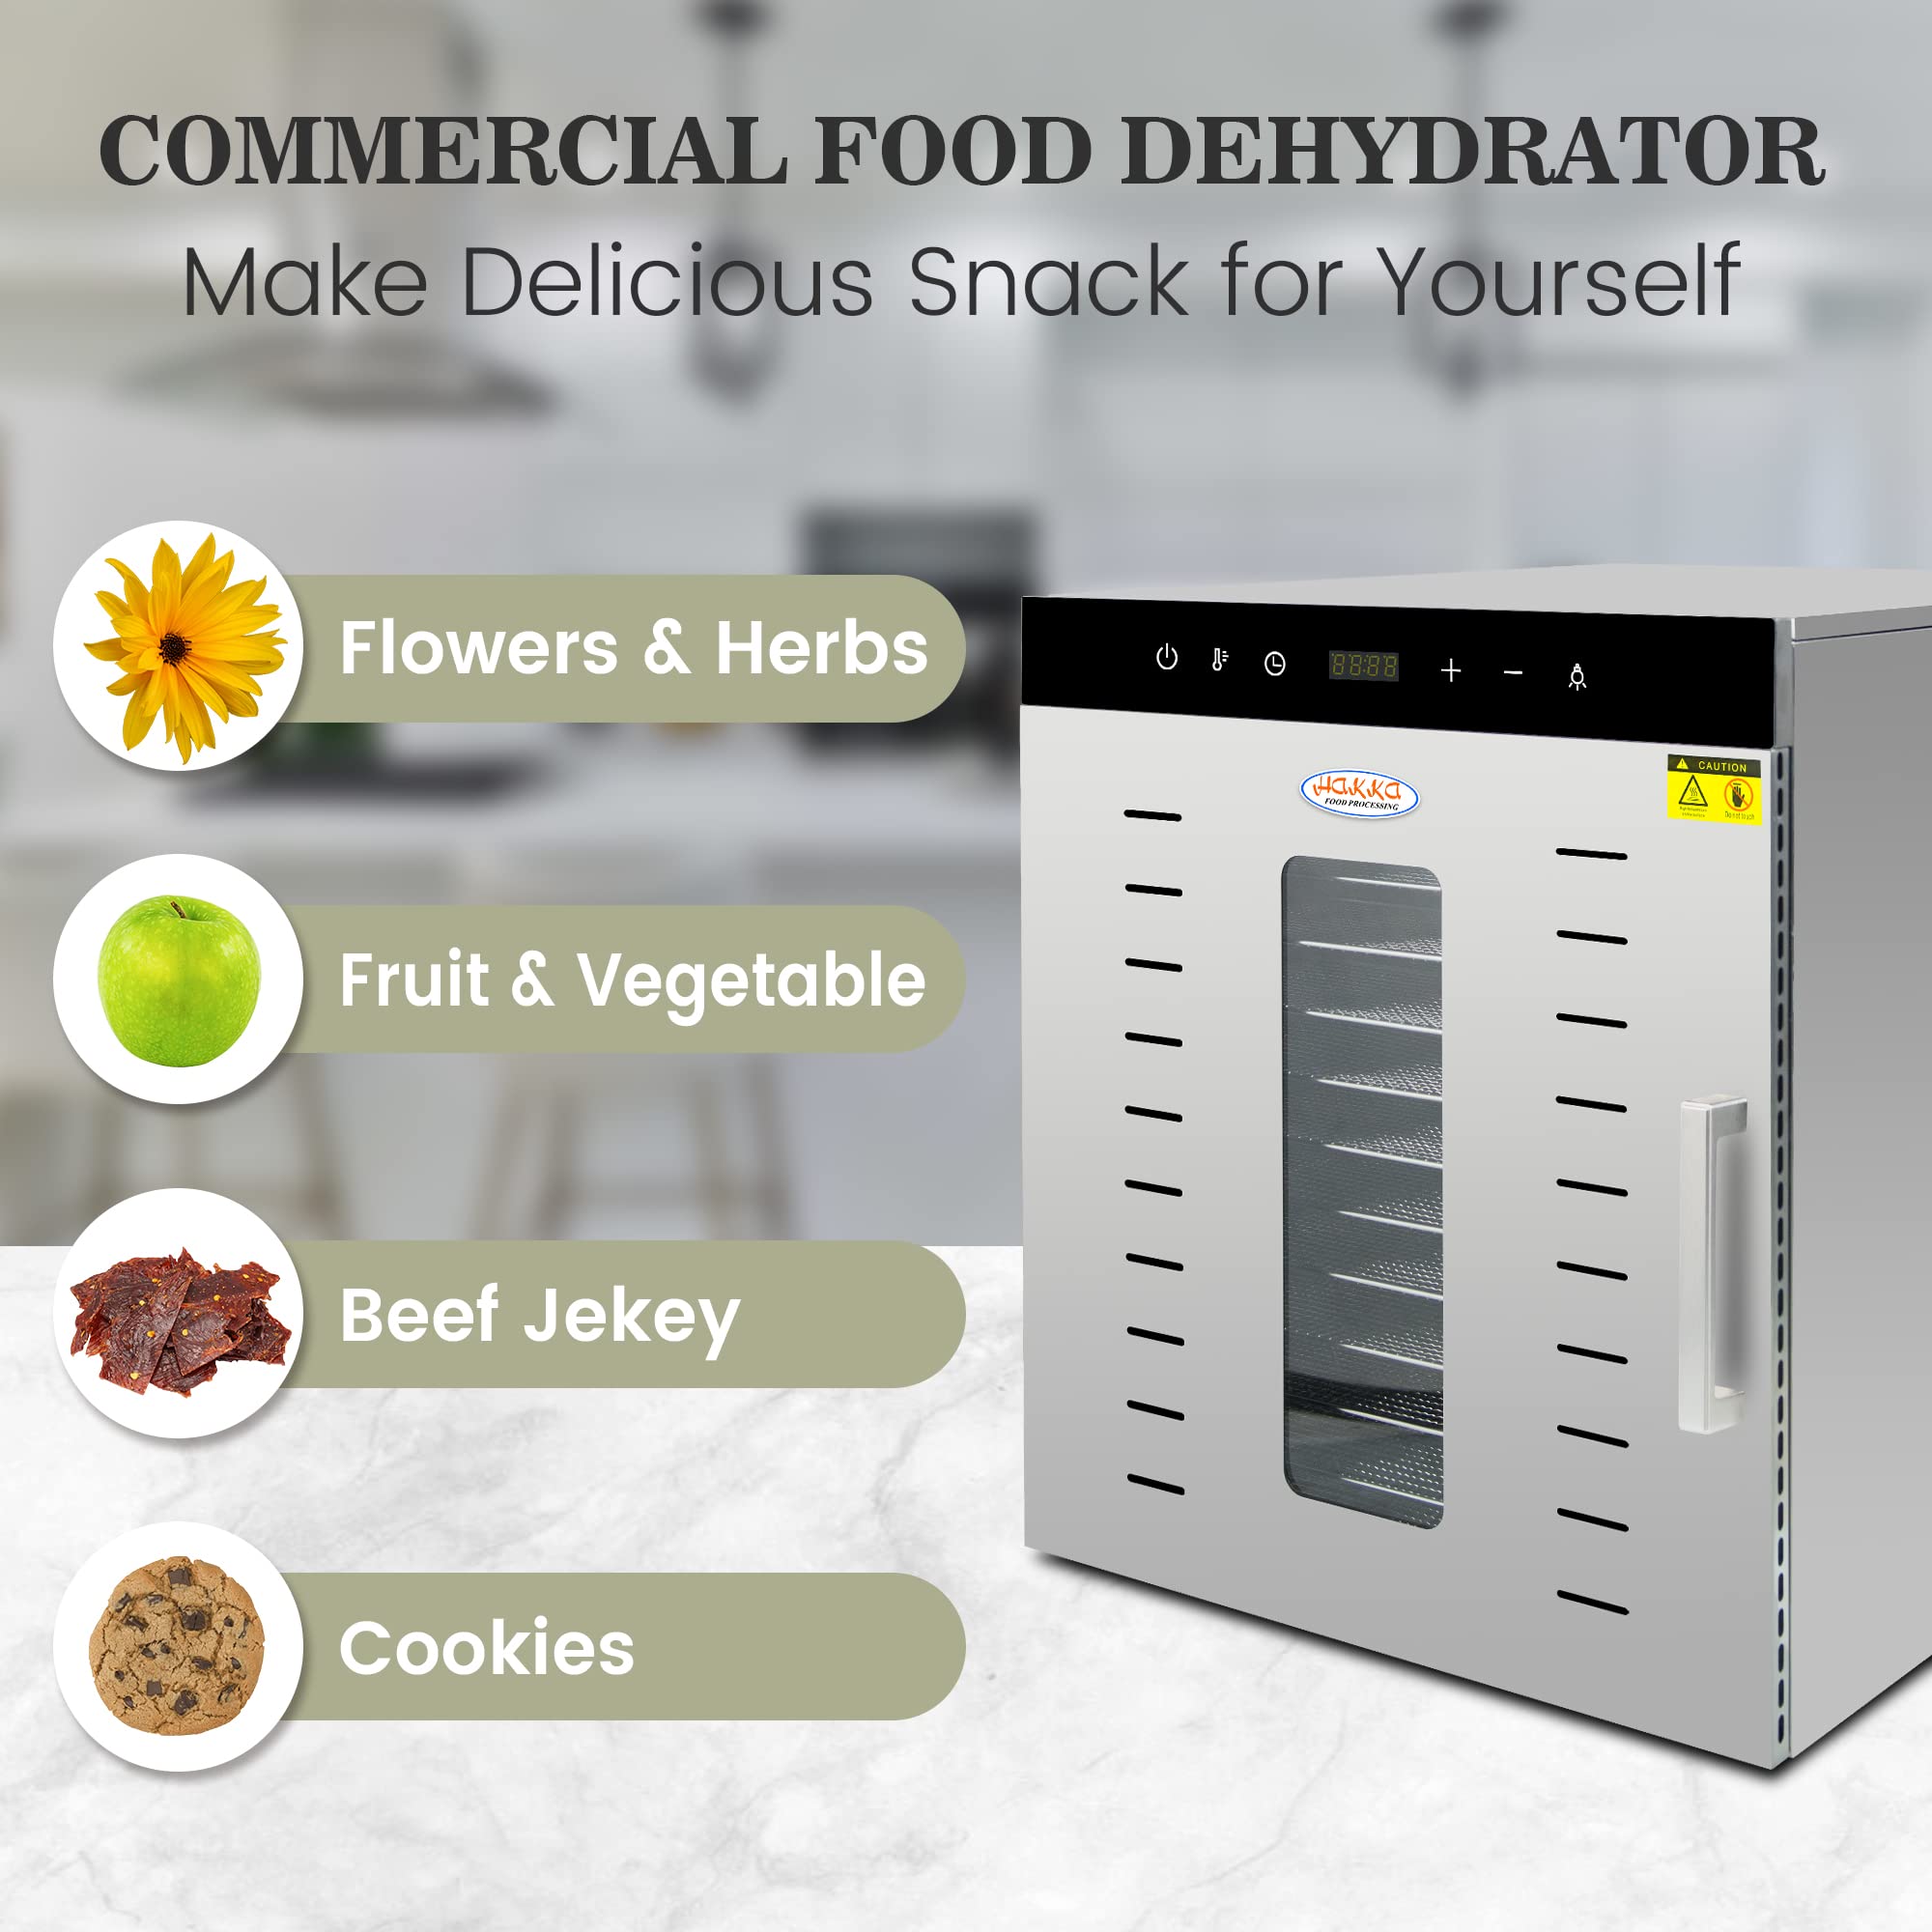 20-Trays 1500W Commercial Stainless Steel Food Dehydrator, Temp + Time  Control